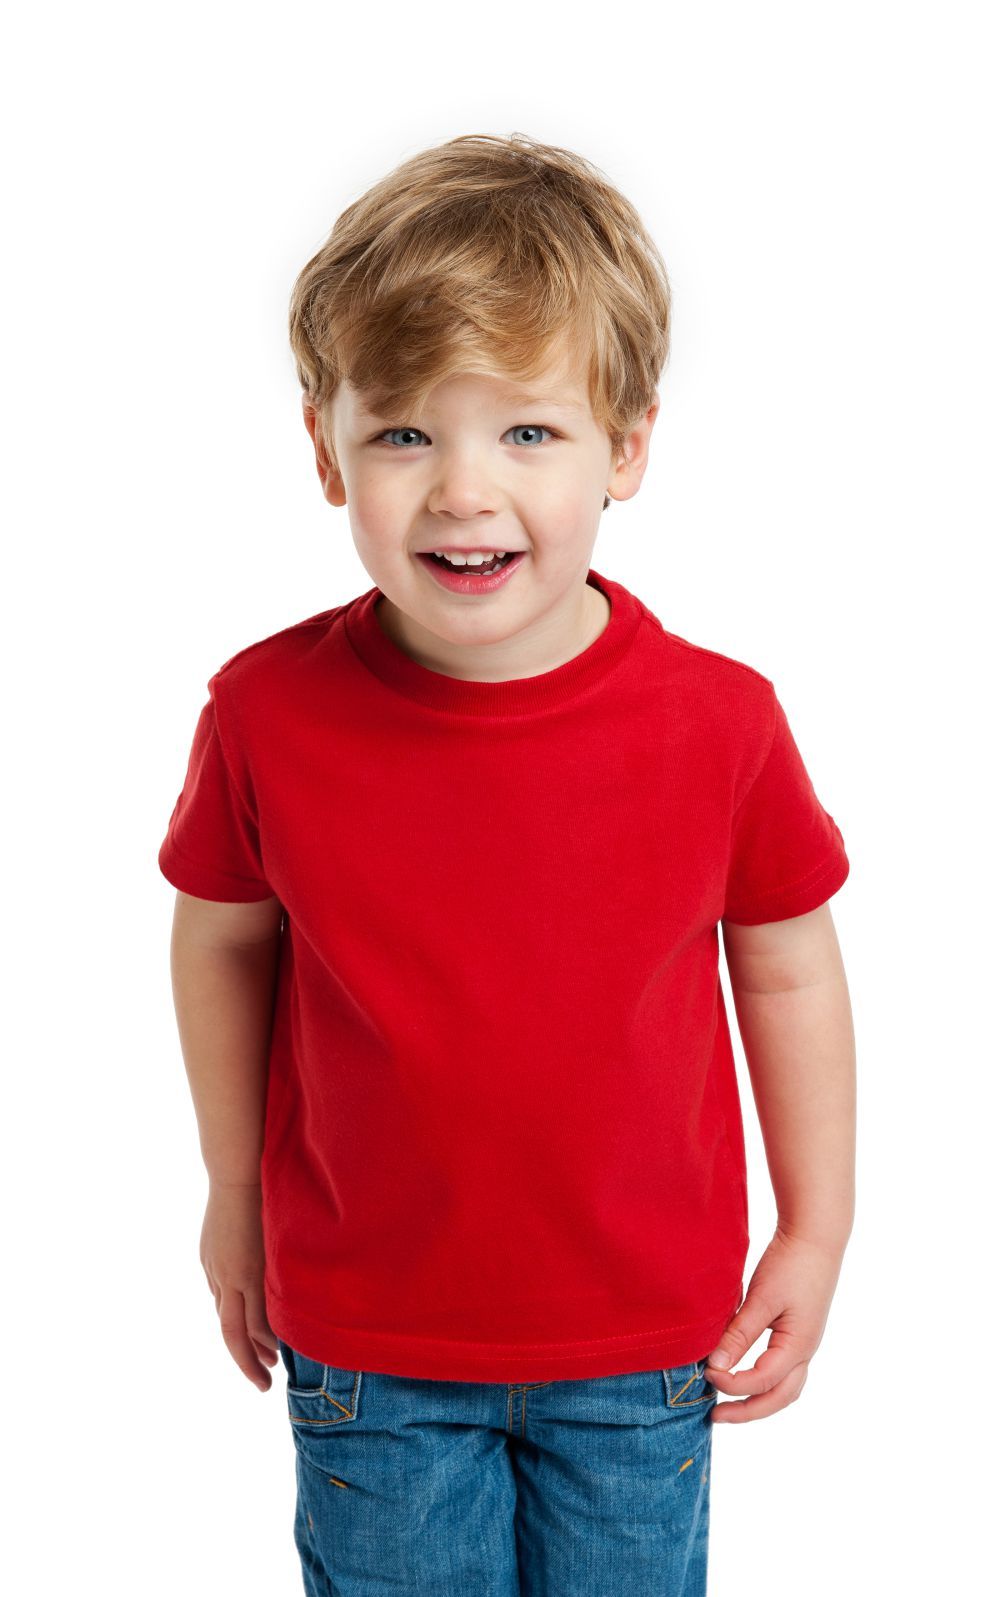 DOUBLE F ROUND NECK HALF SLEEVE RED COLOR PLAIN T-SHIRT FOR BOYS